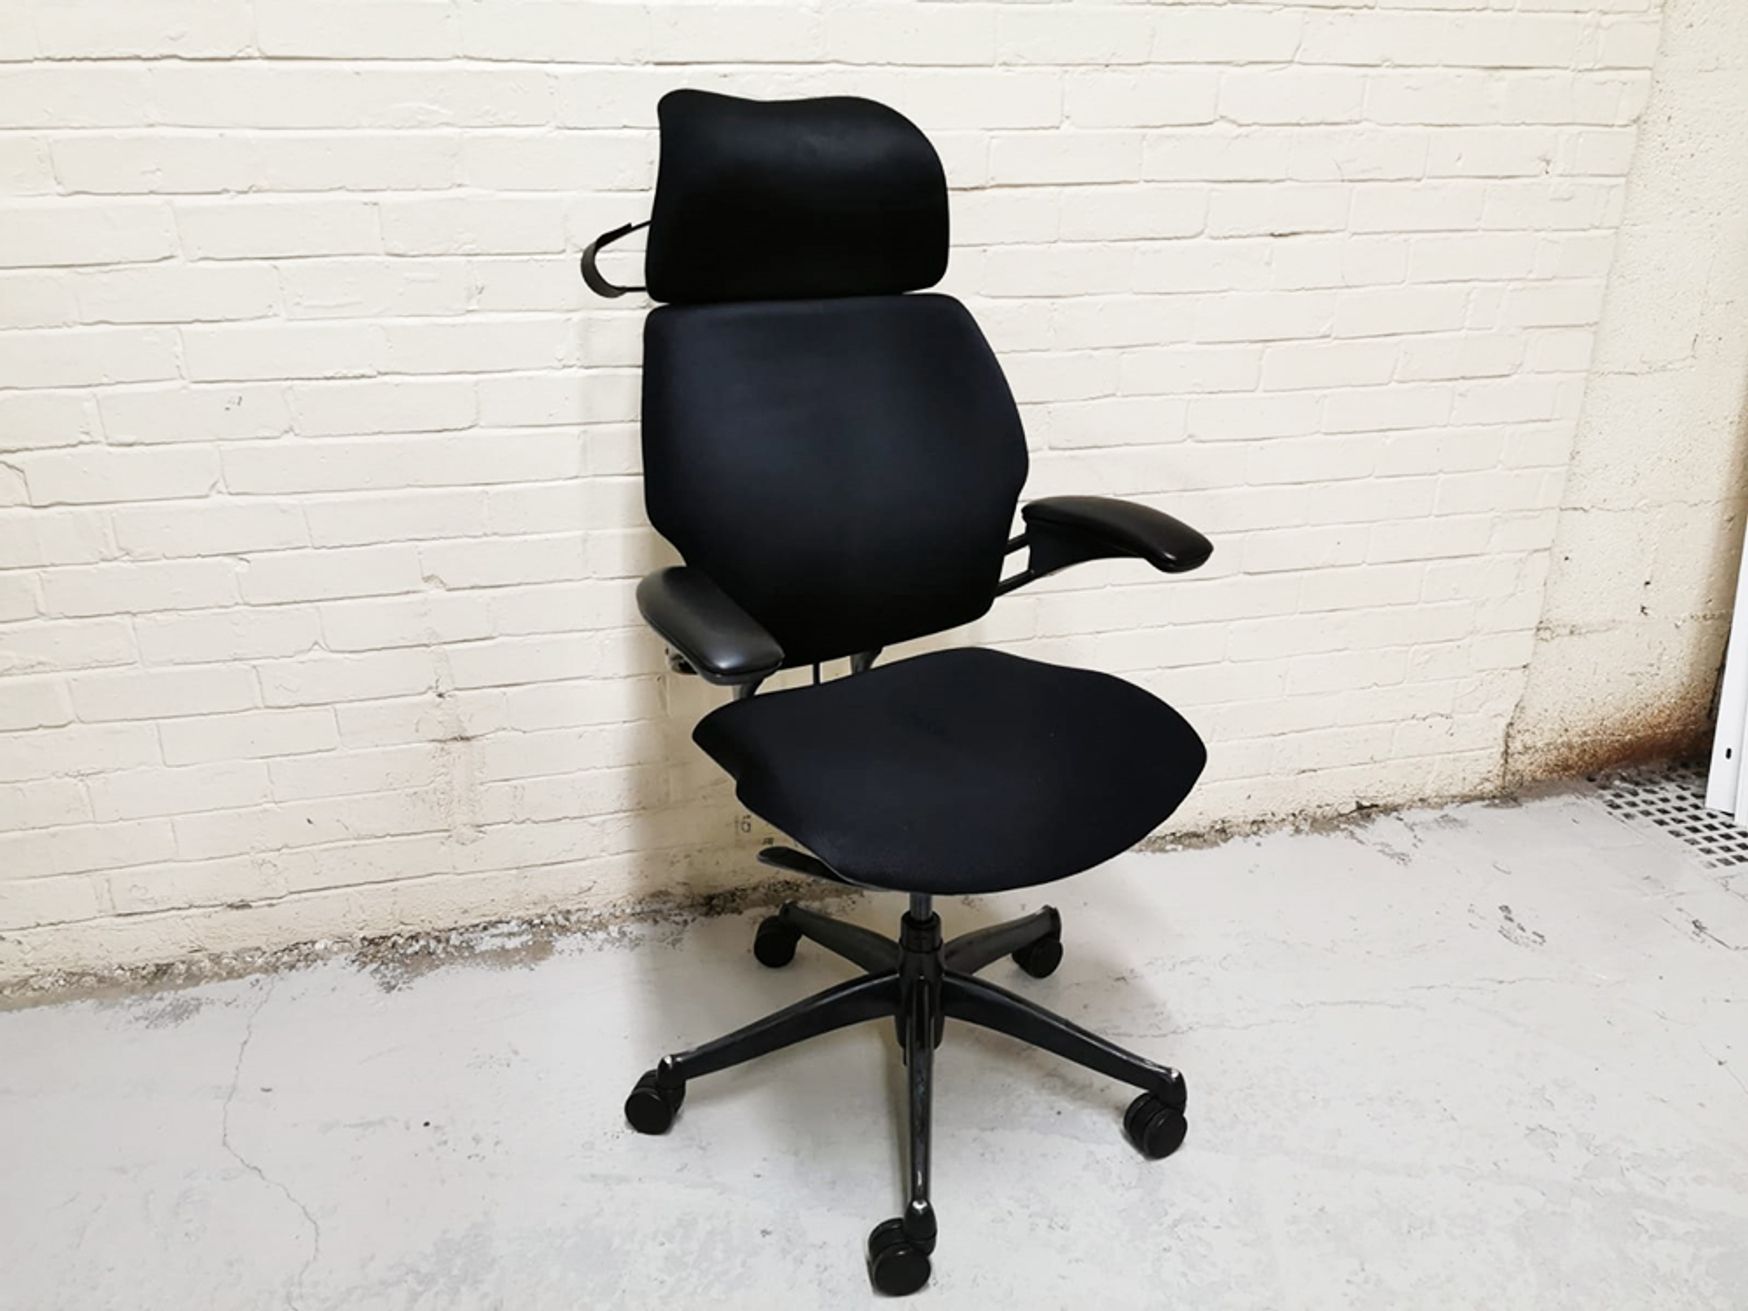 Want Dont : Second Hand Office Furniture - Used Office Furniture |  Chairs | Task/Operator/Executive | Used Humanscale Freedom Chair in Black  Fabric with Headrest and Coat Hanger